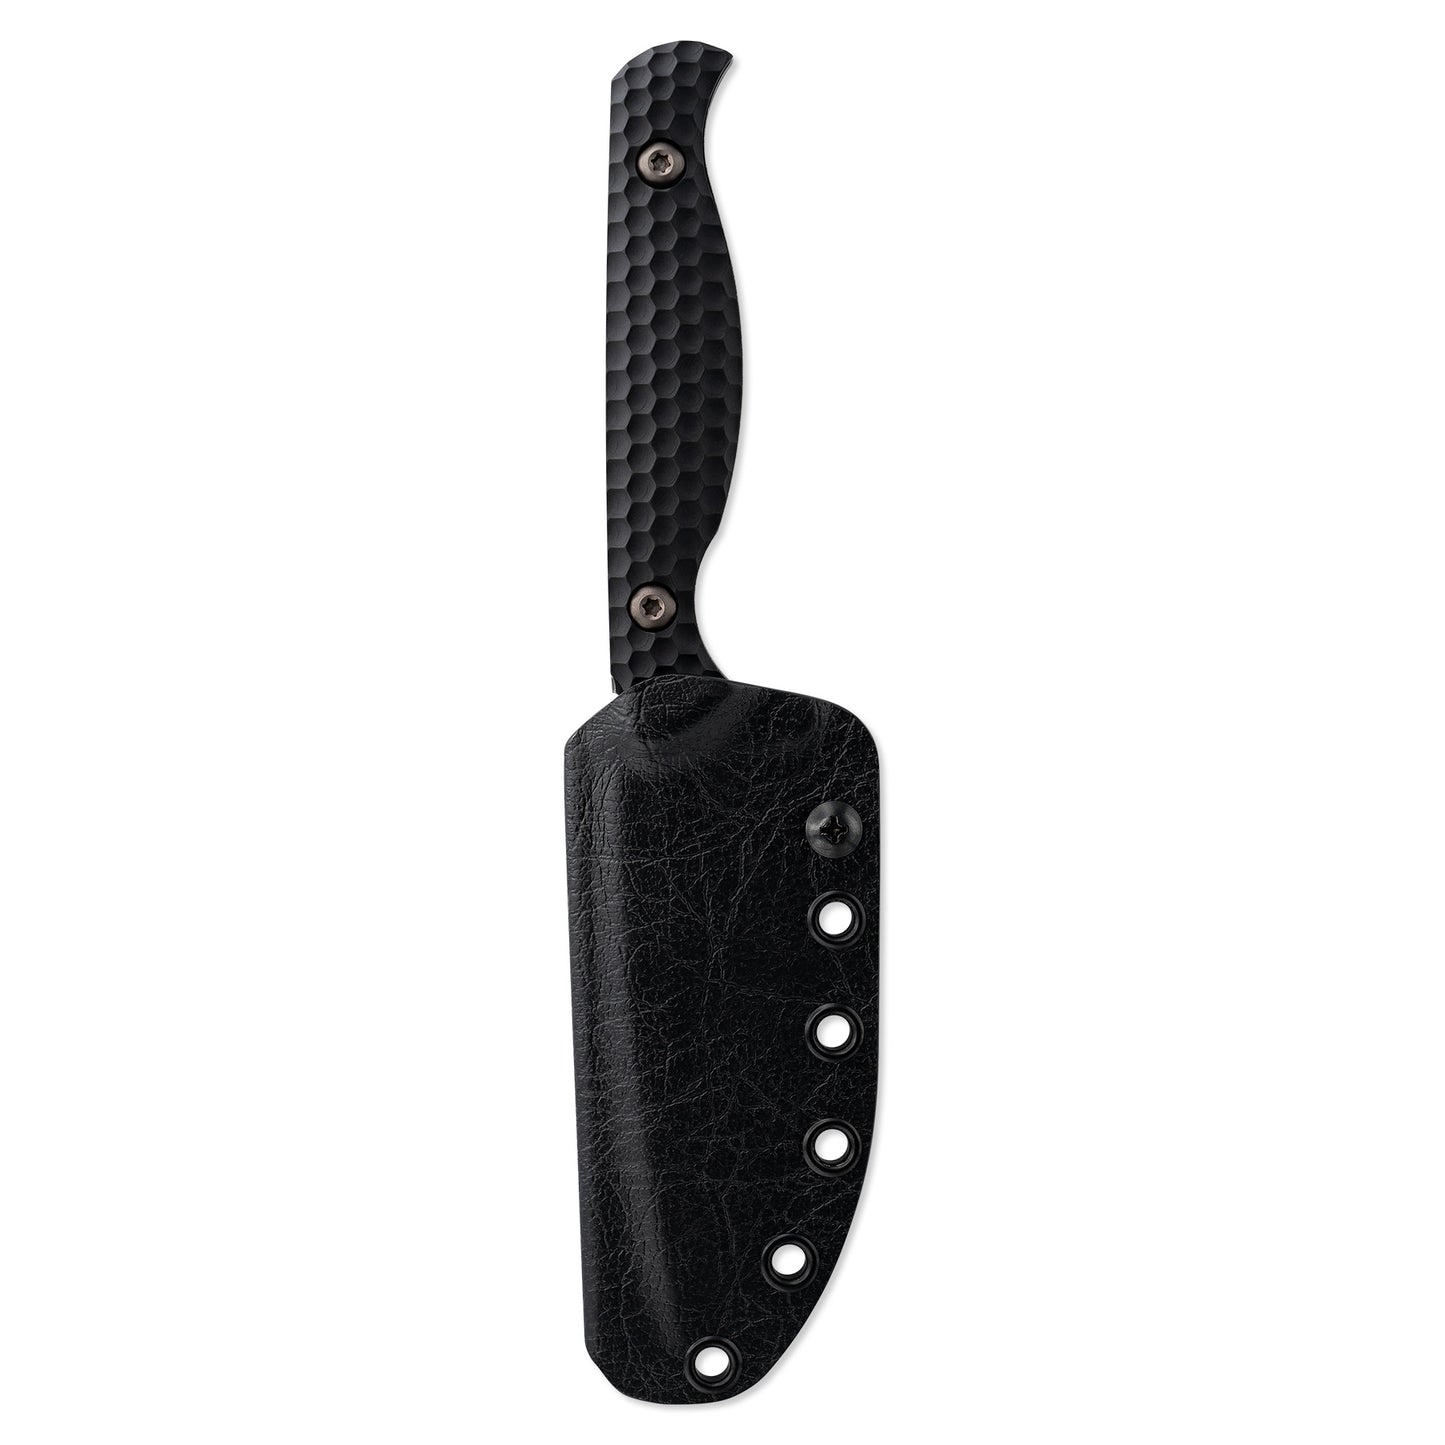 Toor Knives Skallywag Tactical Mutiny Cannon Black 4